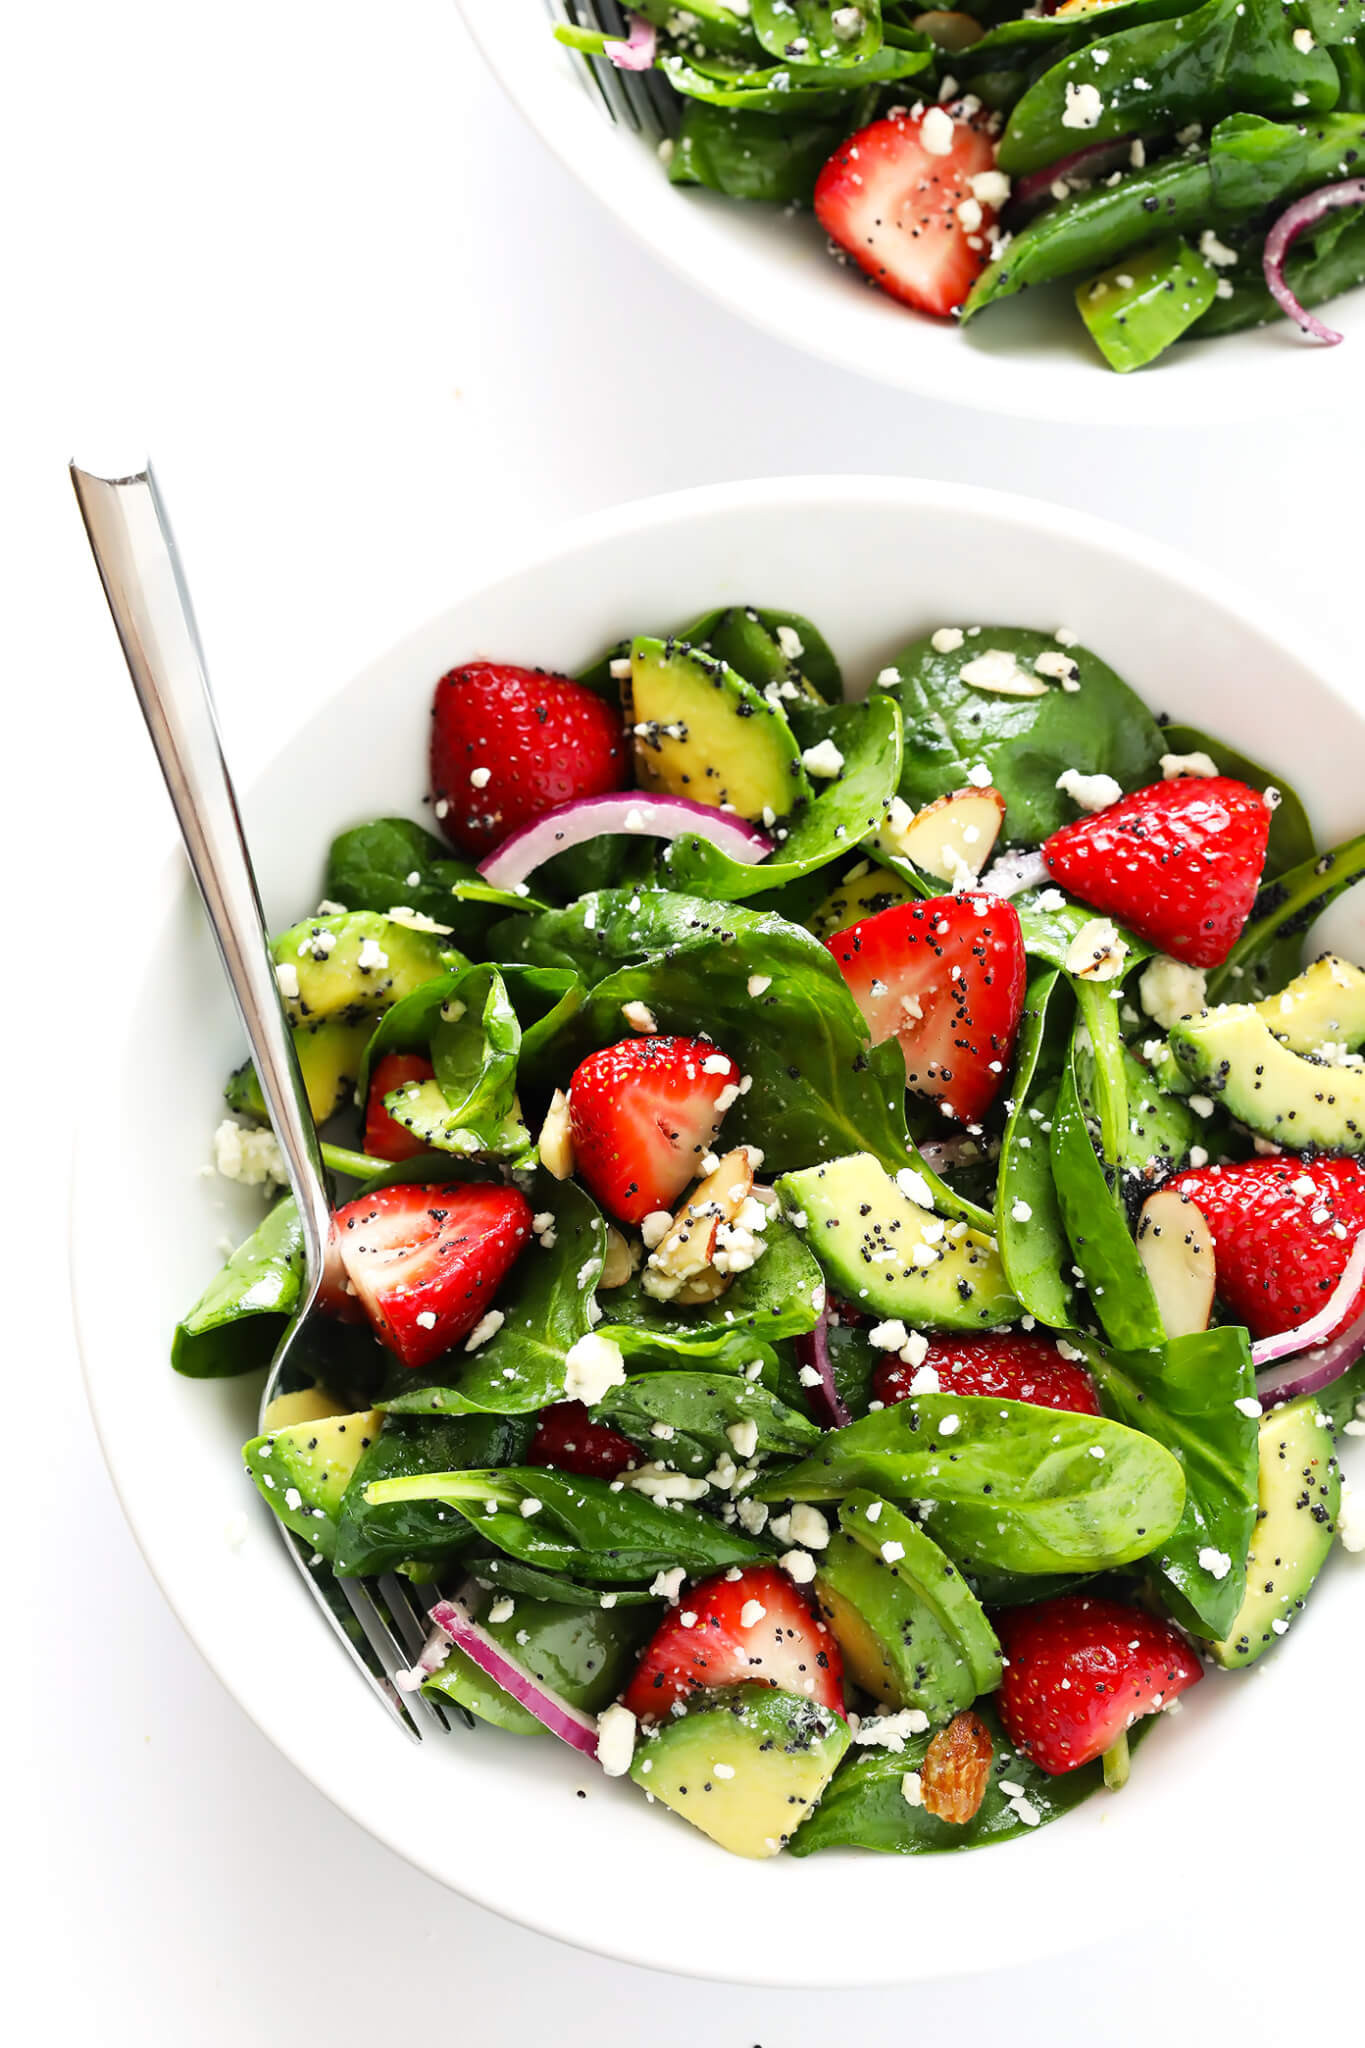 Salad Dressings For Spinach Salad
 Avocado Strawberry Spinach Salad with Poppyseed